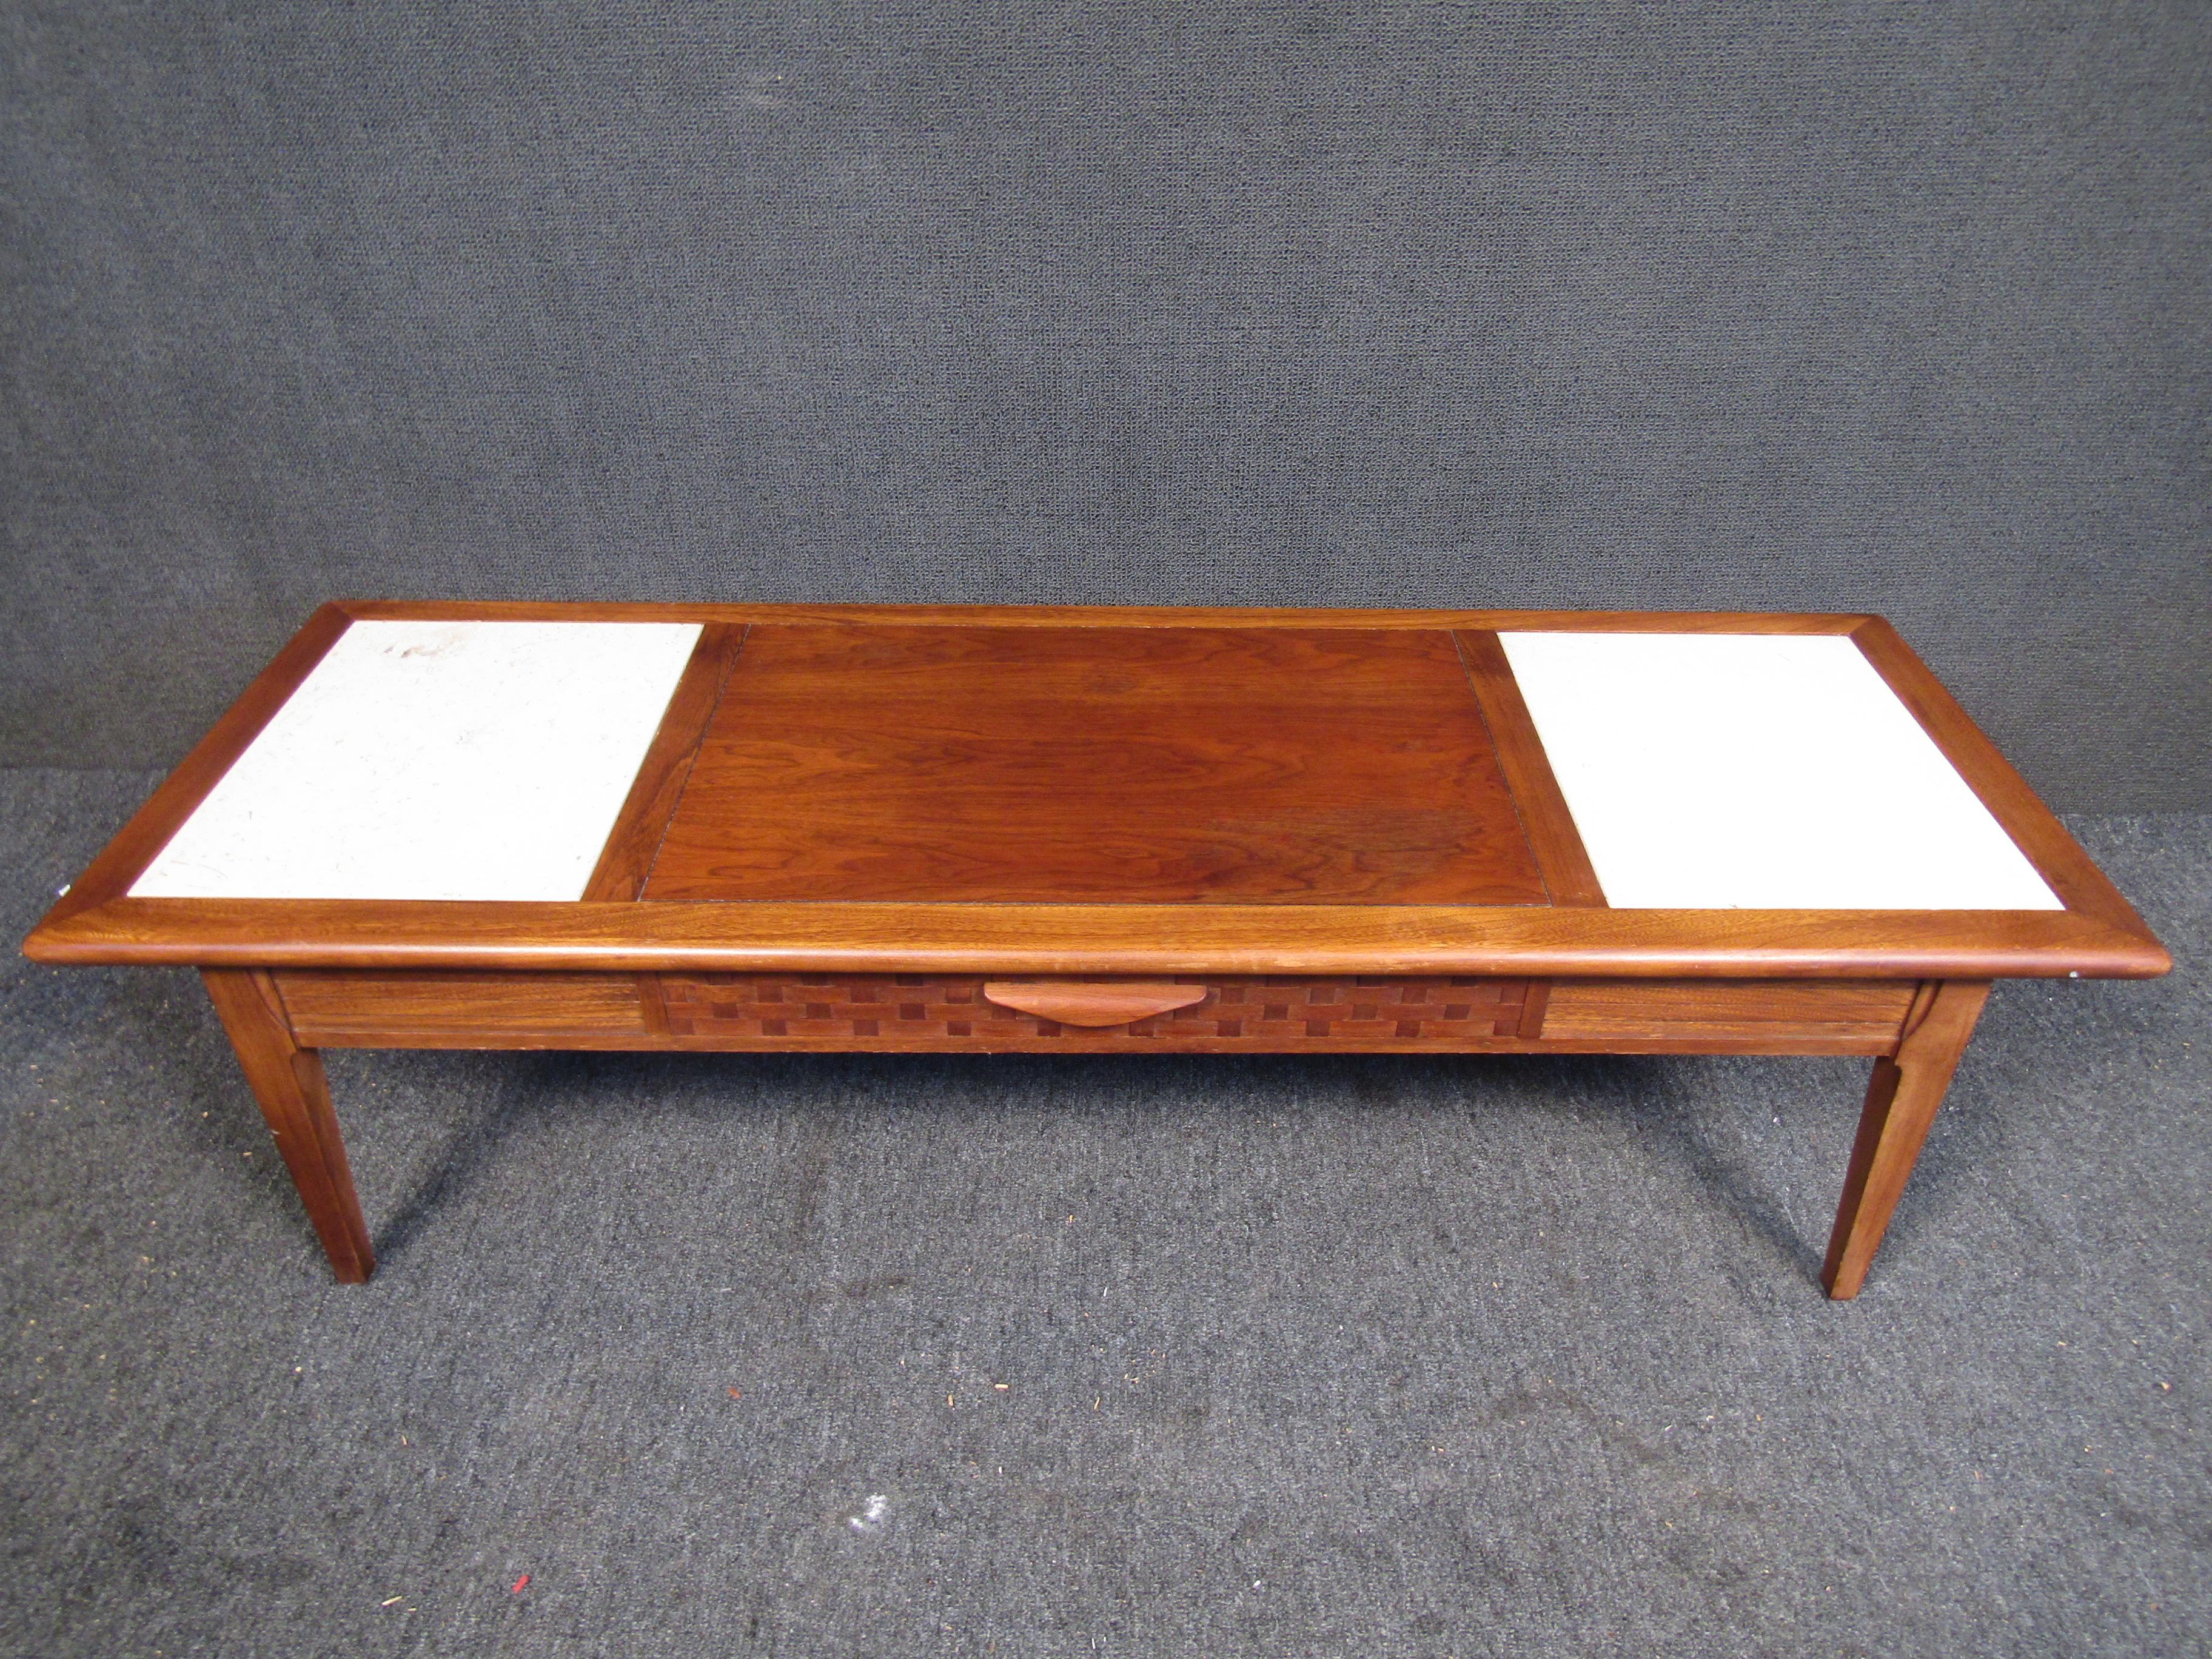 Mid century coffee table by Lane. This elegant table features walnut and oak wood construction, stone inserts, one basket woven front and tapered legs. This table would work perfectly in any living space needing a coffee table to rest a drink or